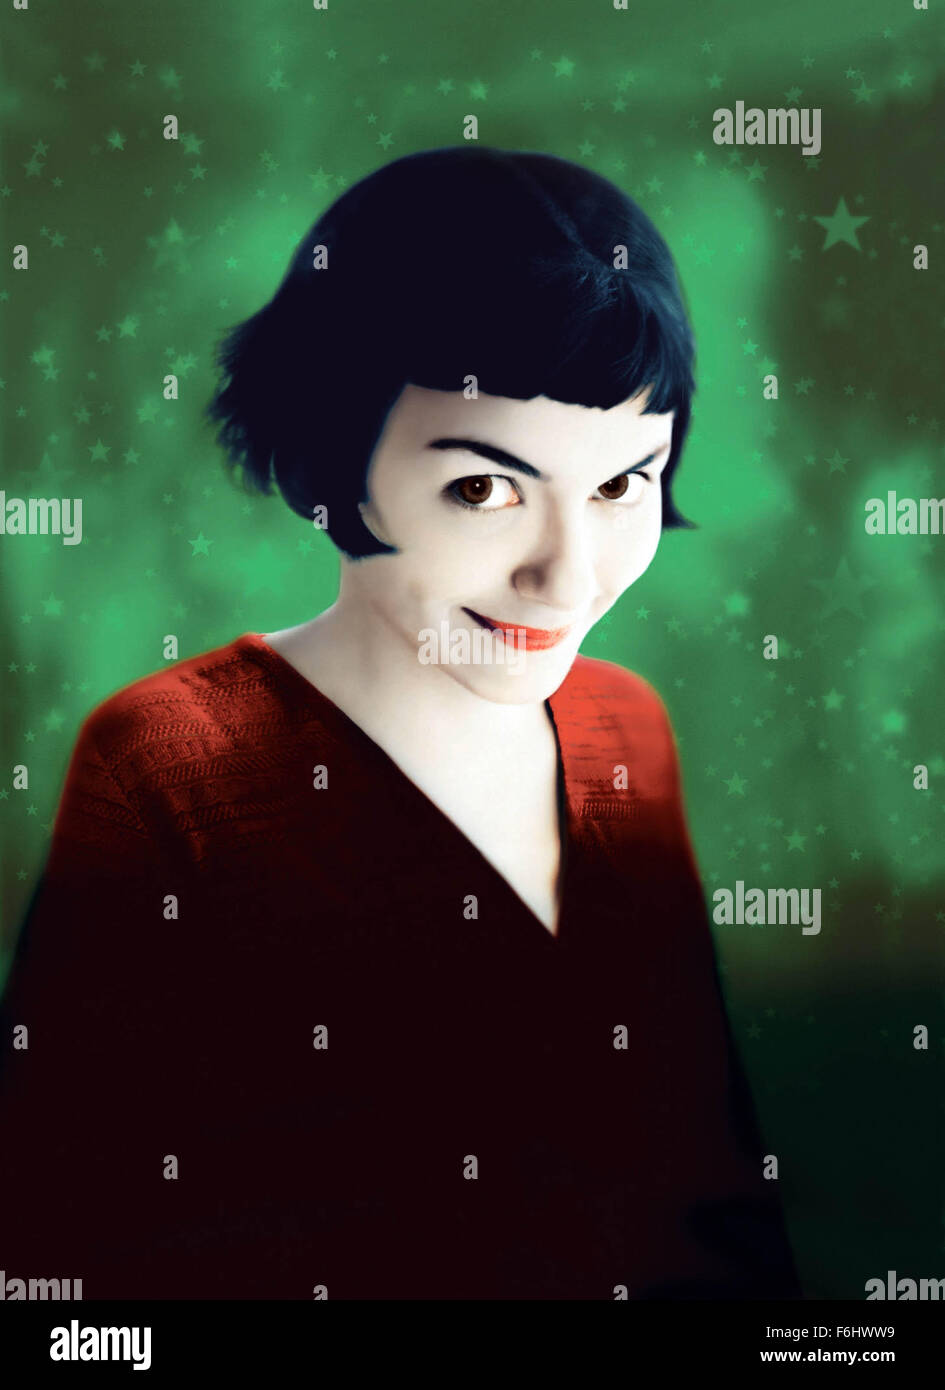 RELEASE DATE: April 25, 2002. MOVIE TITLE: Amelie. STUDIO: Miramax Zoe.  PLOT: Amelie, an innocent and naive girl in Paris, with her own sense of  justice, decides to help those around her